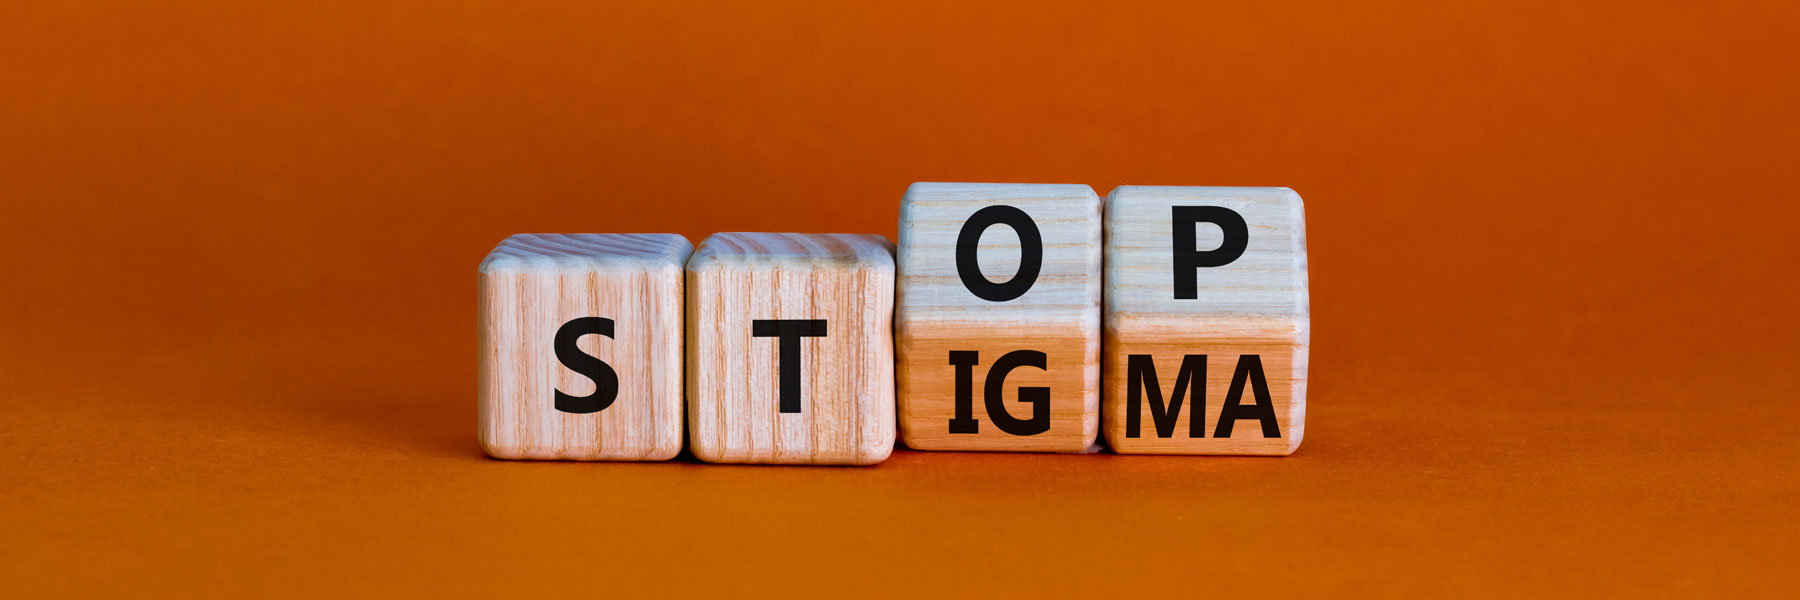 stop stigma spelled out on game pieces